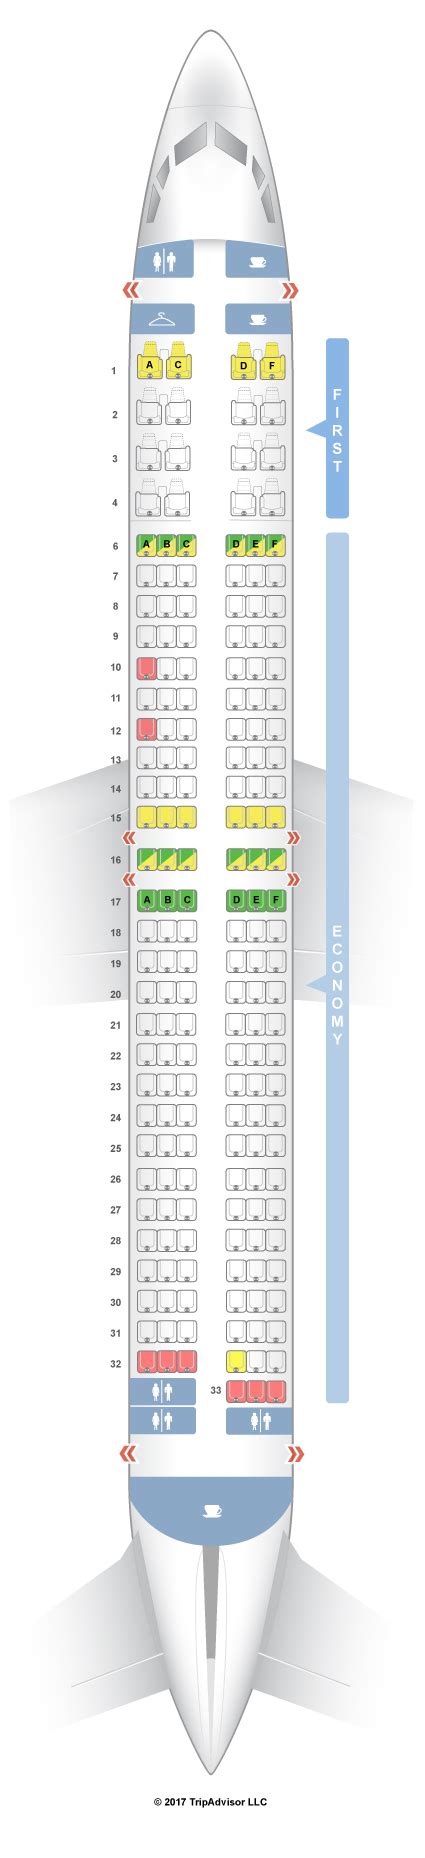 737 900 alaska seat map. The United 737 900 seating chart shows that the plane offers everything to make your flight a pleasant experience. All 737 United Airlines are equipped with WiFi for flights within the country. However, you can only enjoy the plane’s internet service when it reaches a cruising altitude of 10,000 feet. The in-flight amenities of theUnited 737 ... 